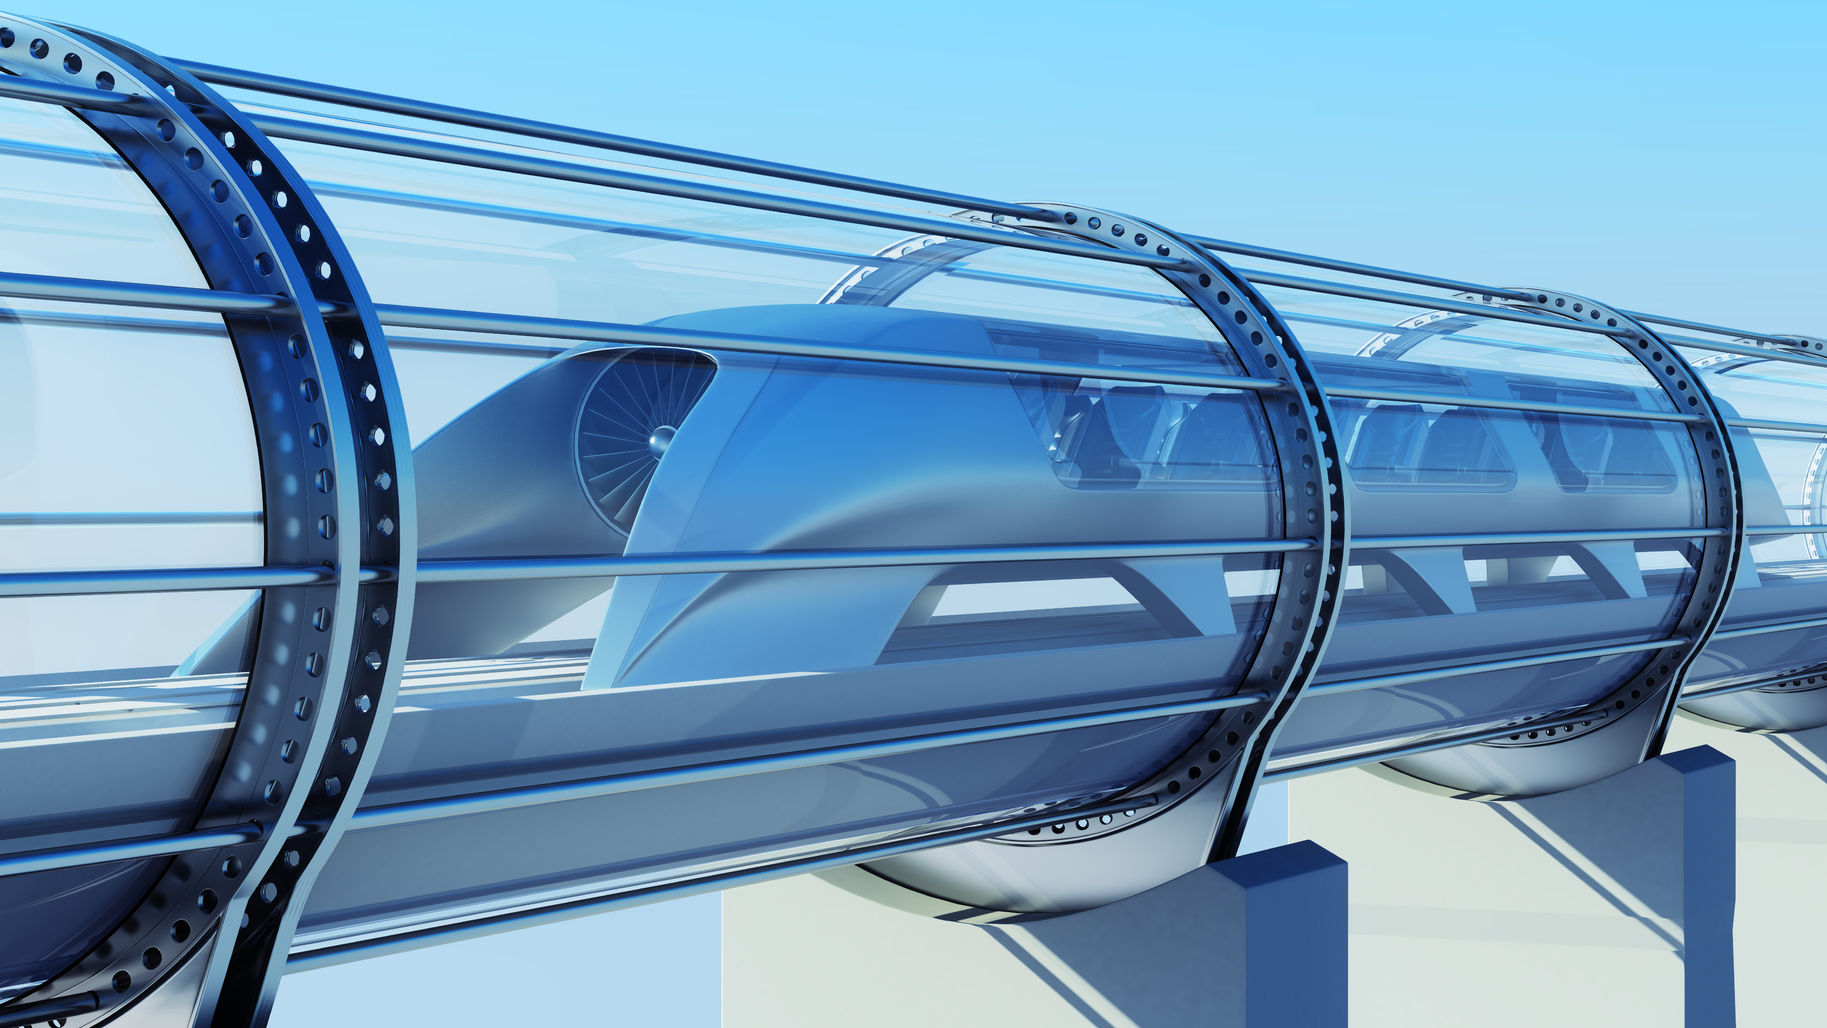 The train of the future living in the present: Hyperloop